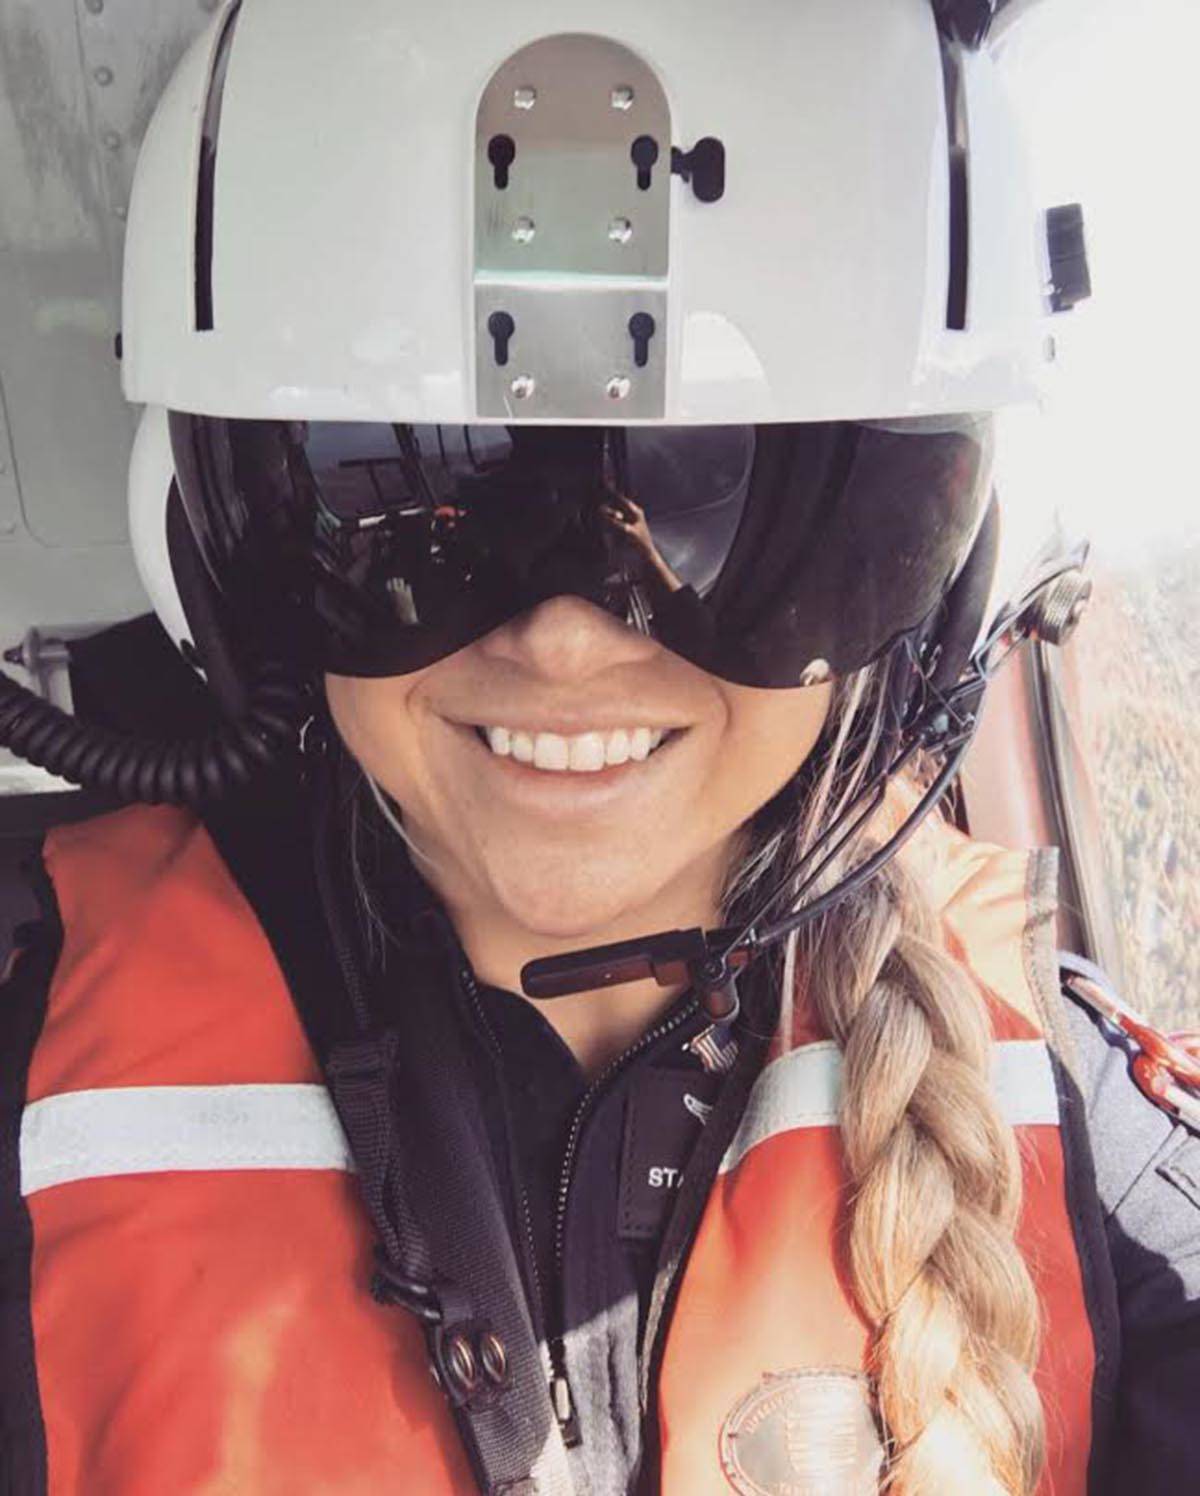 Stacie Morse was a flight nurse with Guardian Flight killed in a crash in 2019, along with the pilot and flight paramedic. A new scholarship is named in her honor. (Courtesy Photo | Every Coast Helicopter Operations)